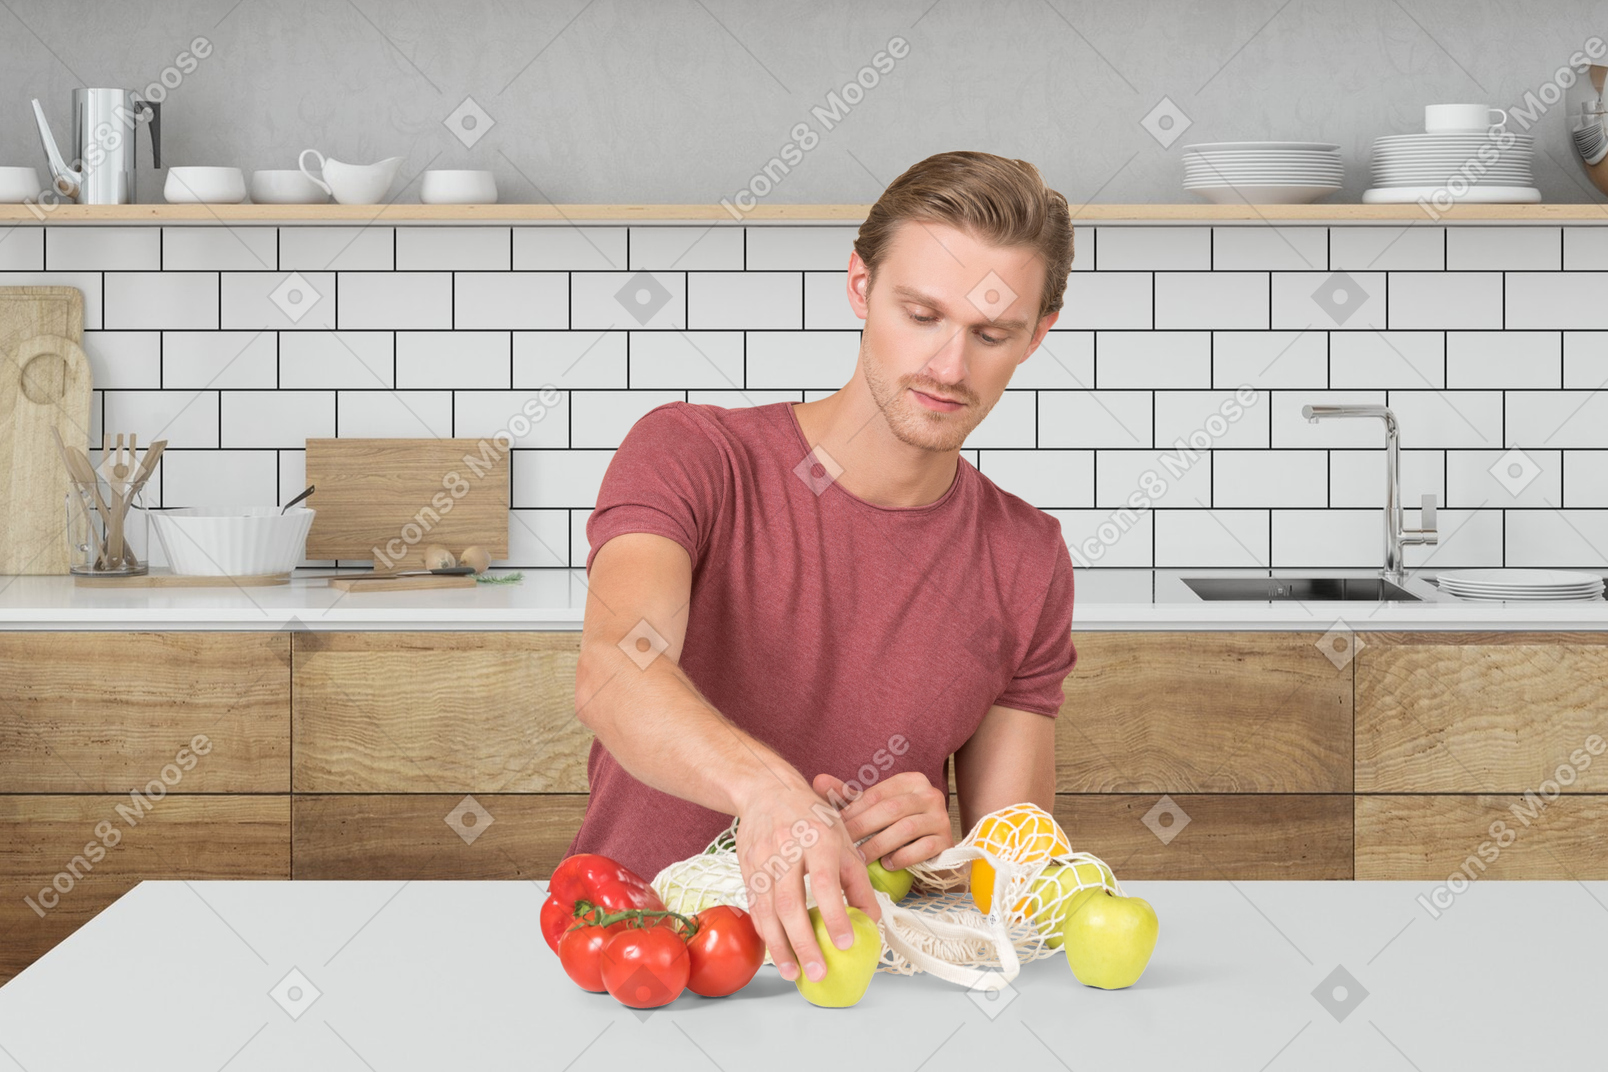 A man in a kitchen taking vegetables out of reusable bag